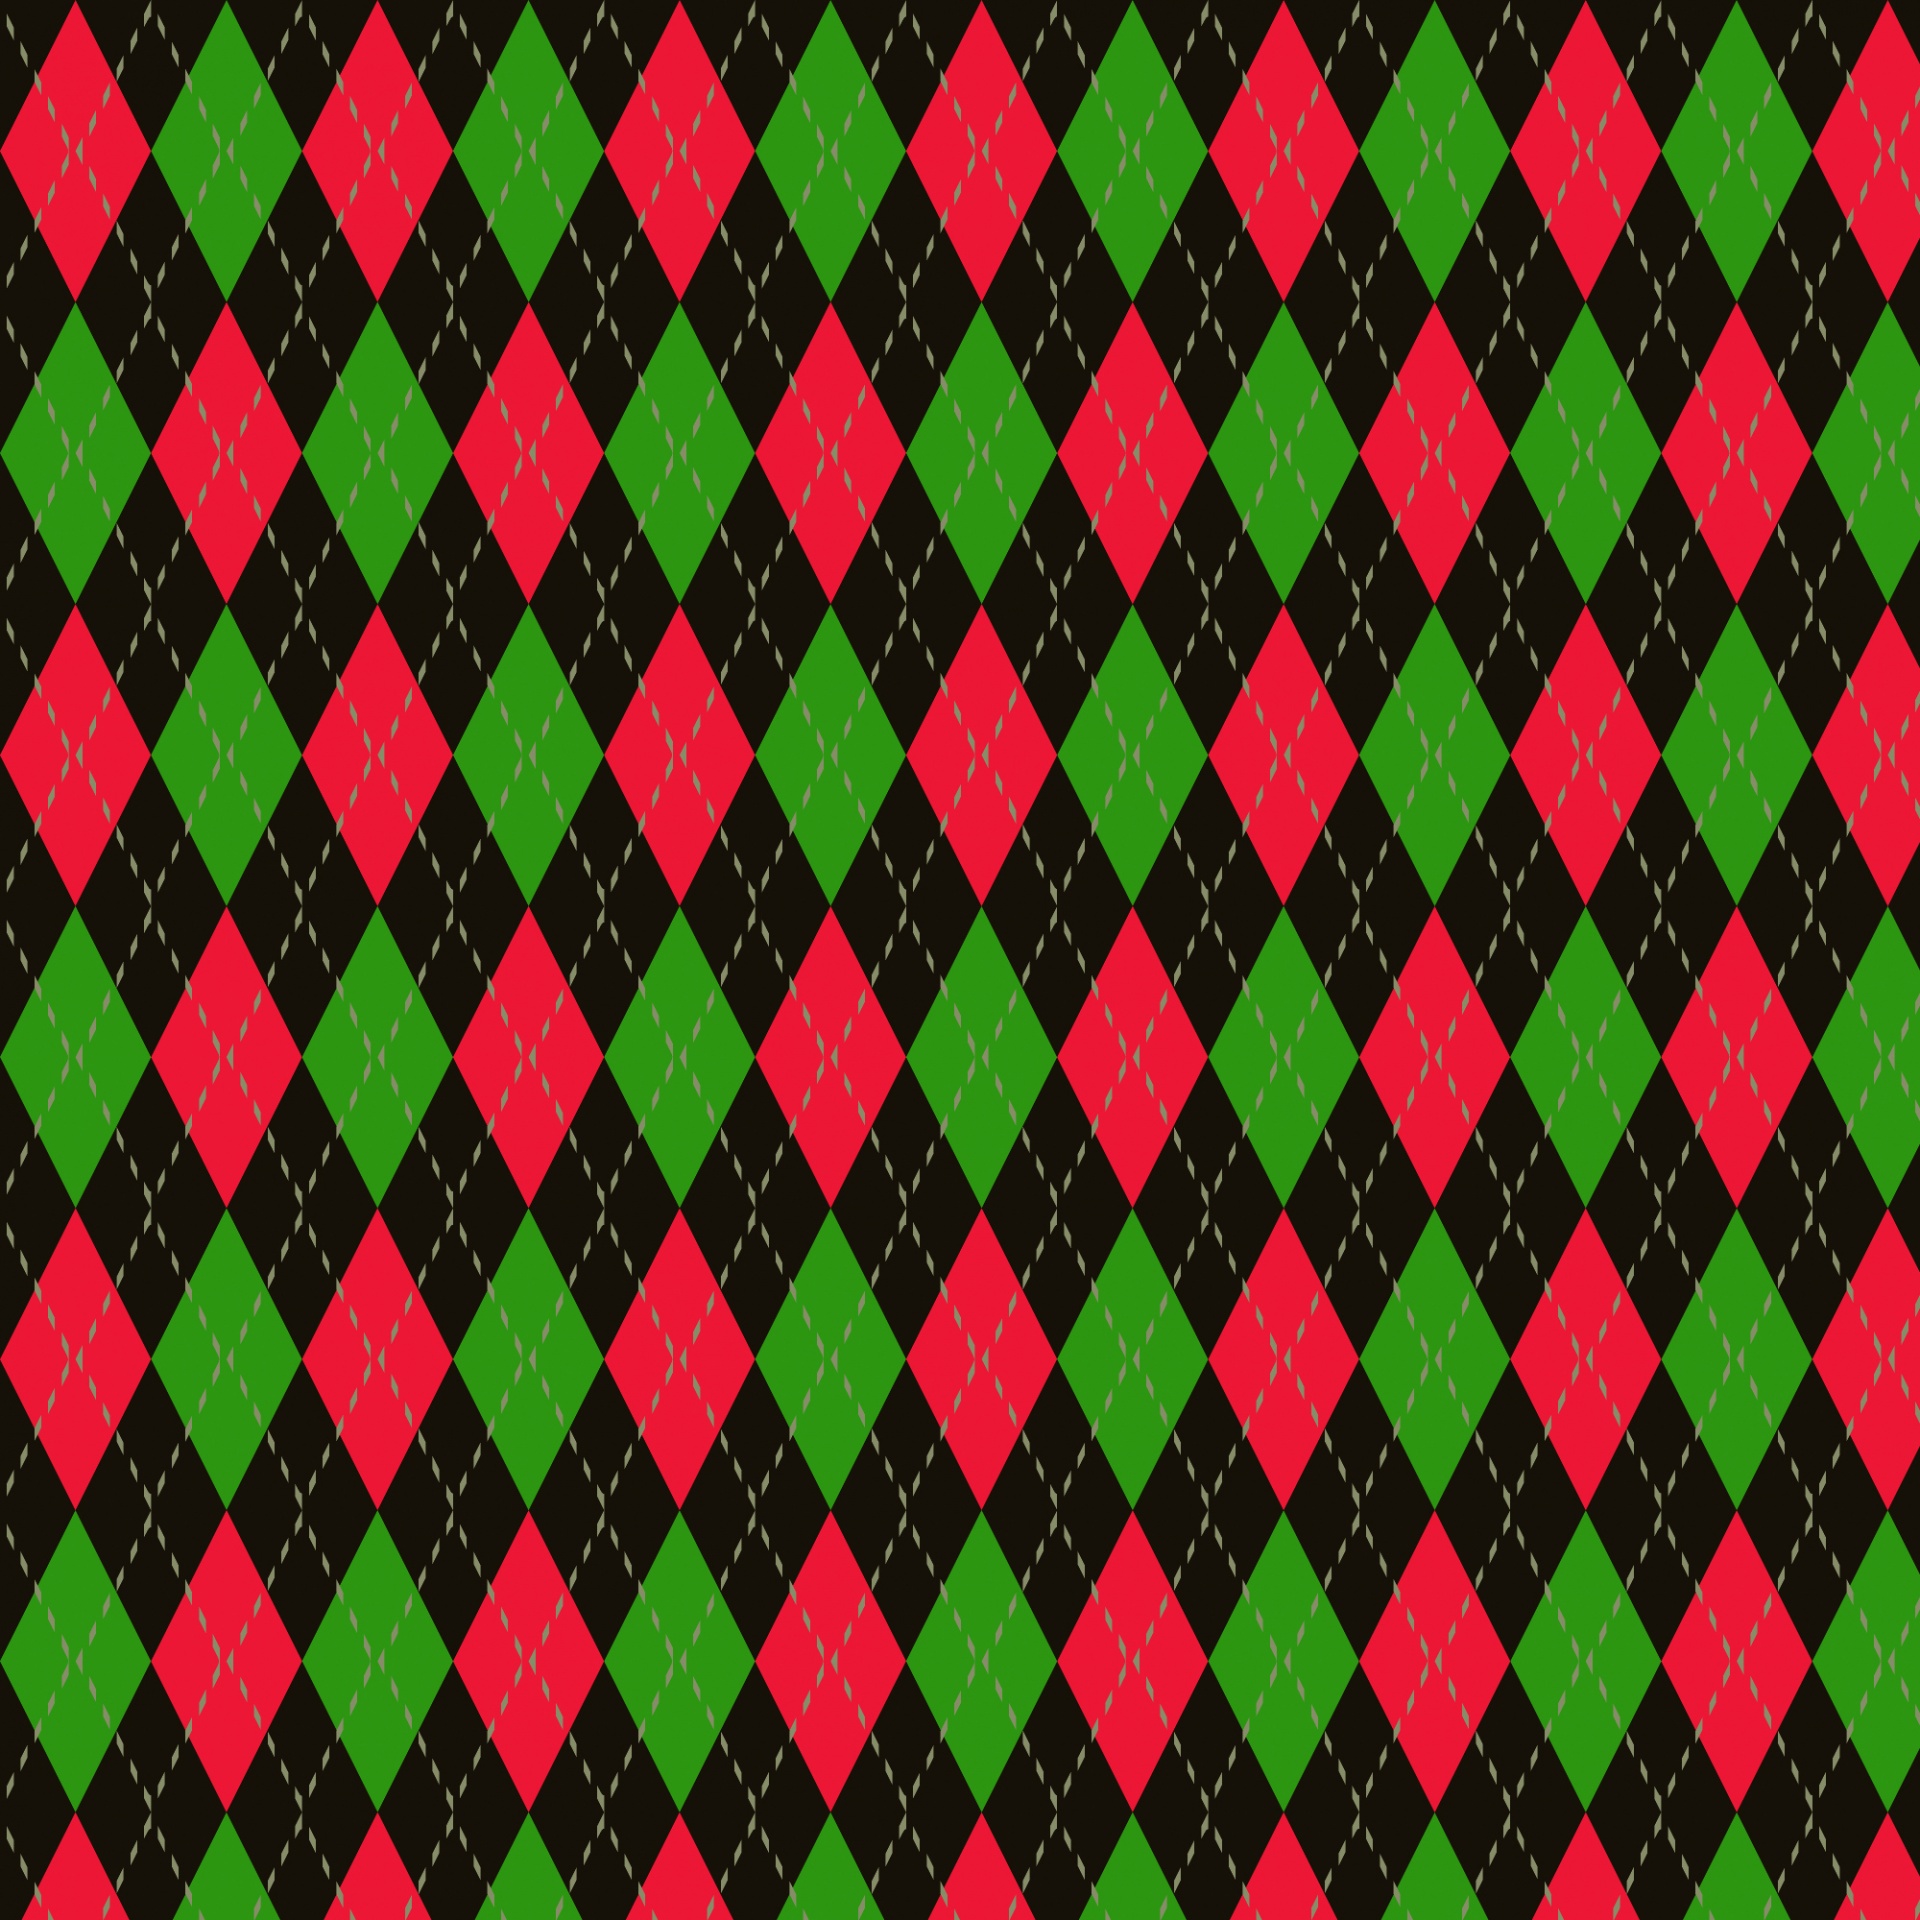 red and green diamonds on black background argyle pattern